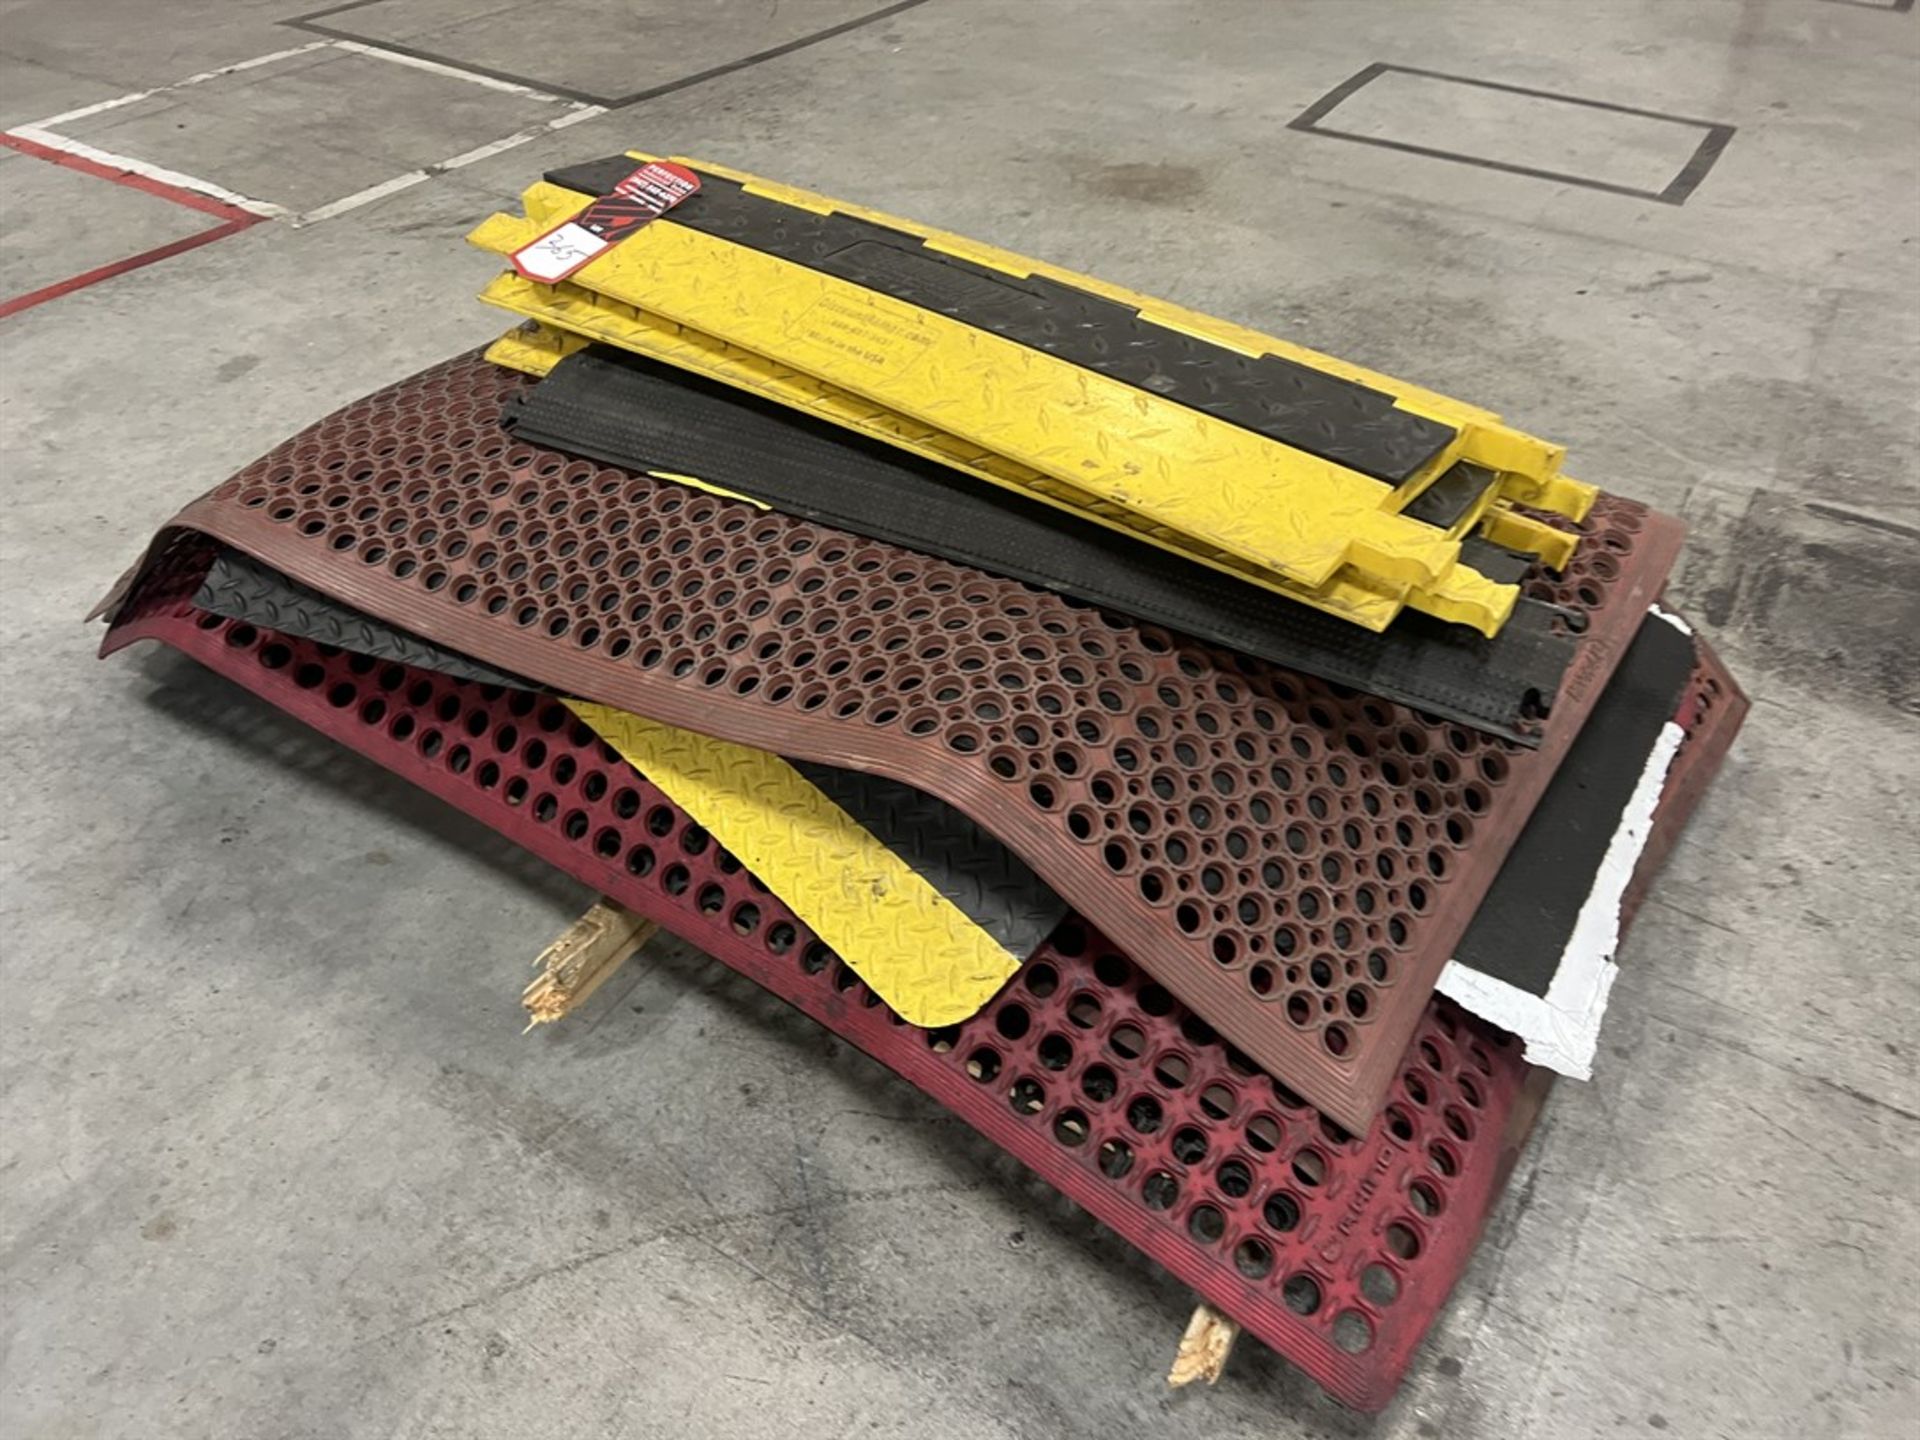 Lot of Shop Anti-Fatigue Floor Mats and Speed Bumps - Image 2 of 2